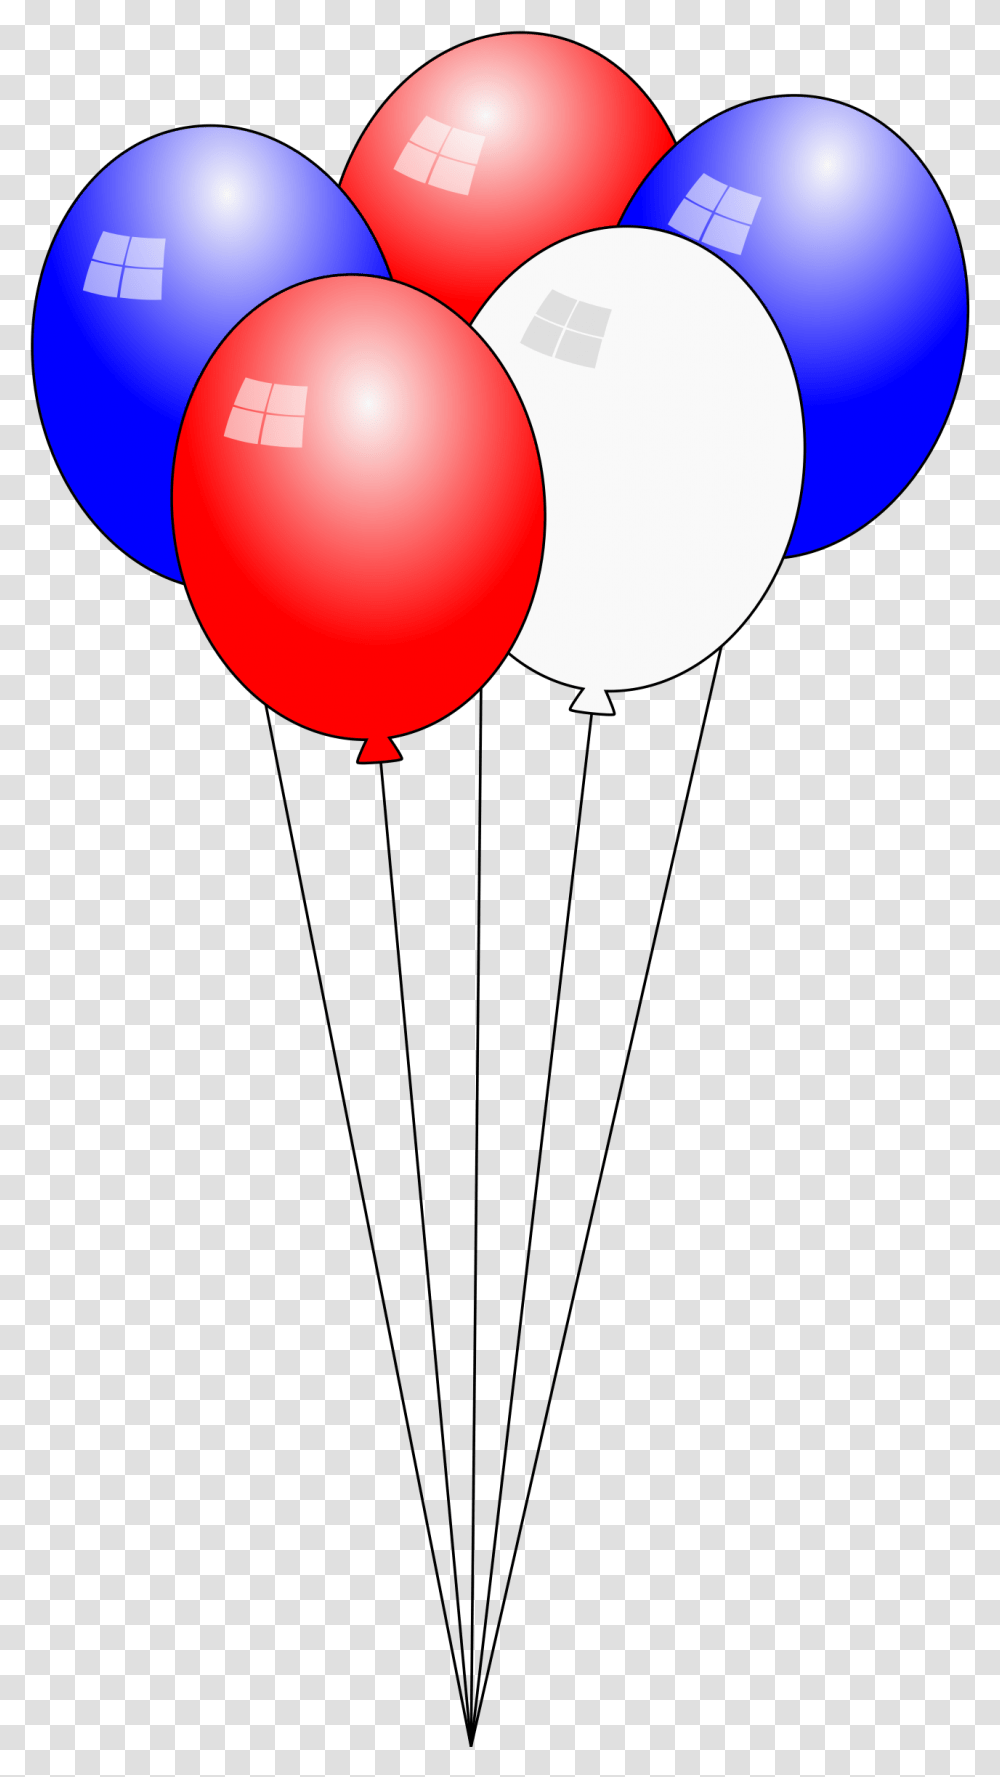 Swaying 4th Of July Balloons Animation Clip Arts Red White And Blue Balloons Clip Art, Logo Transparent Png